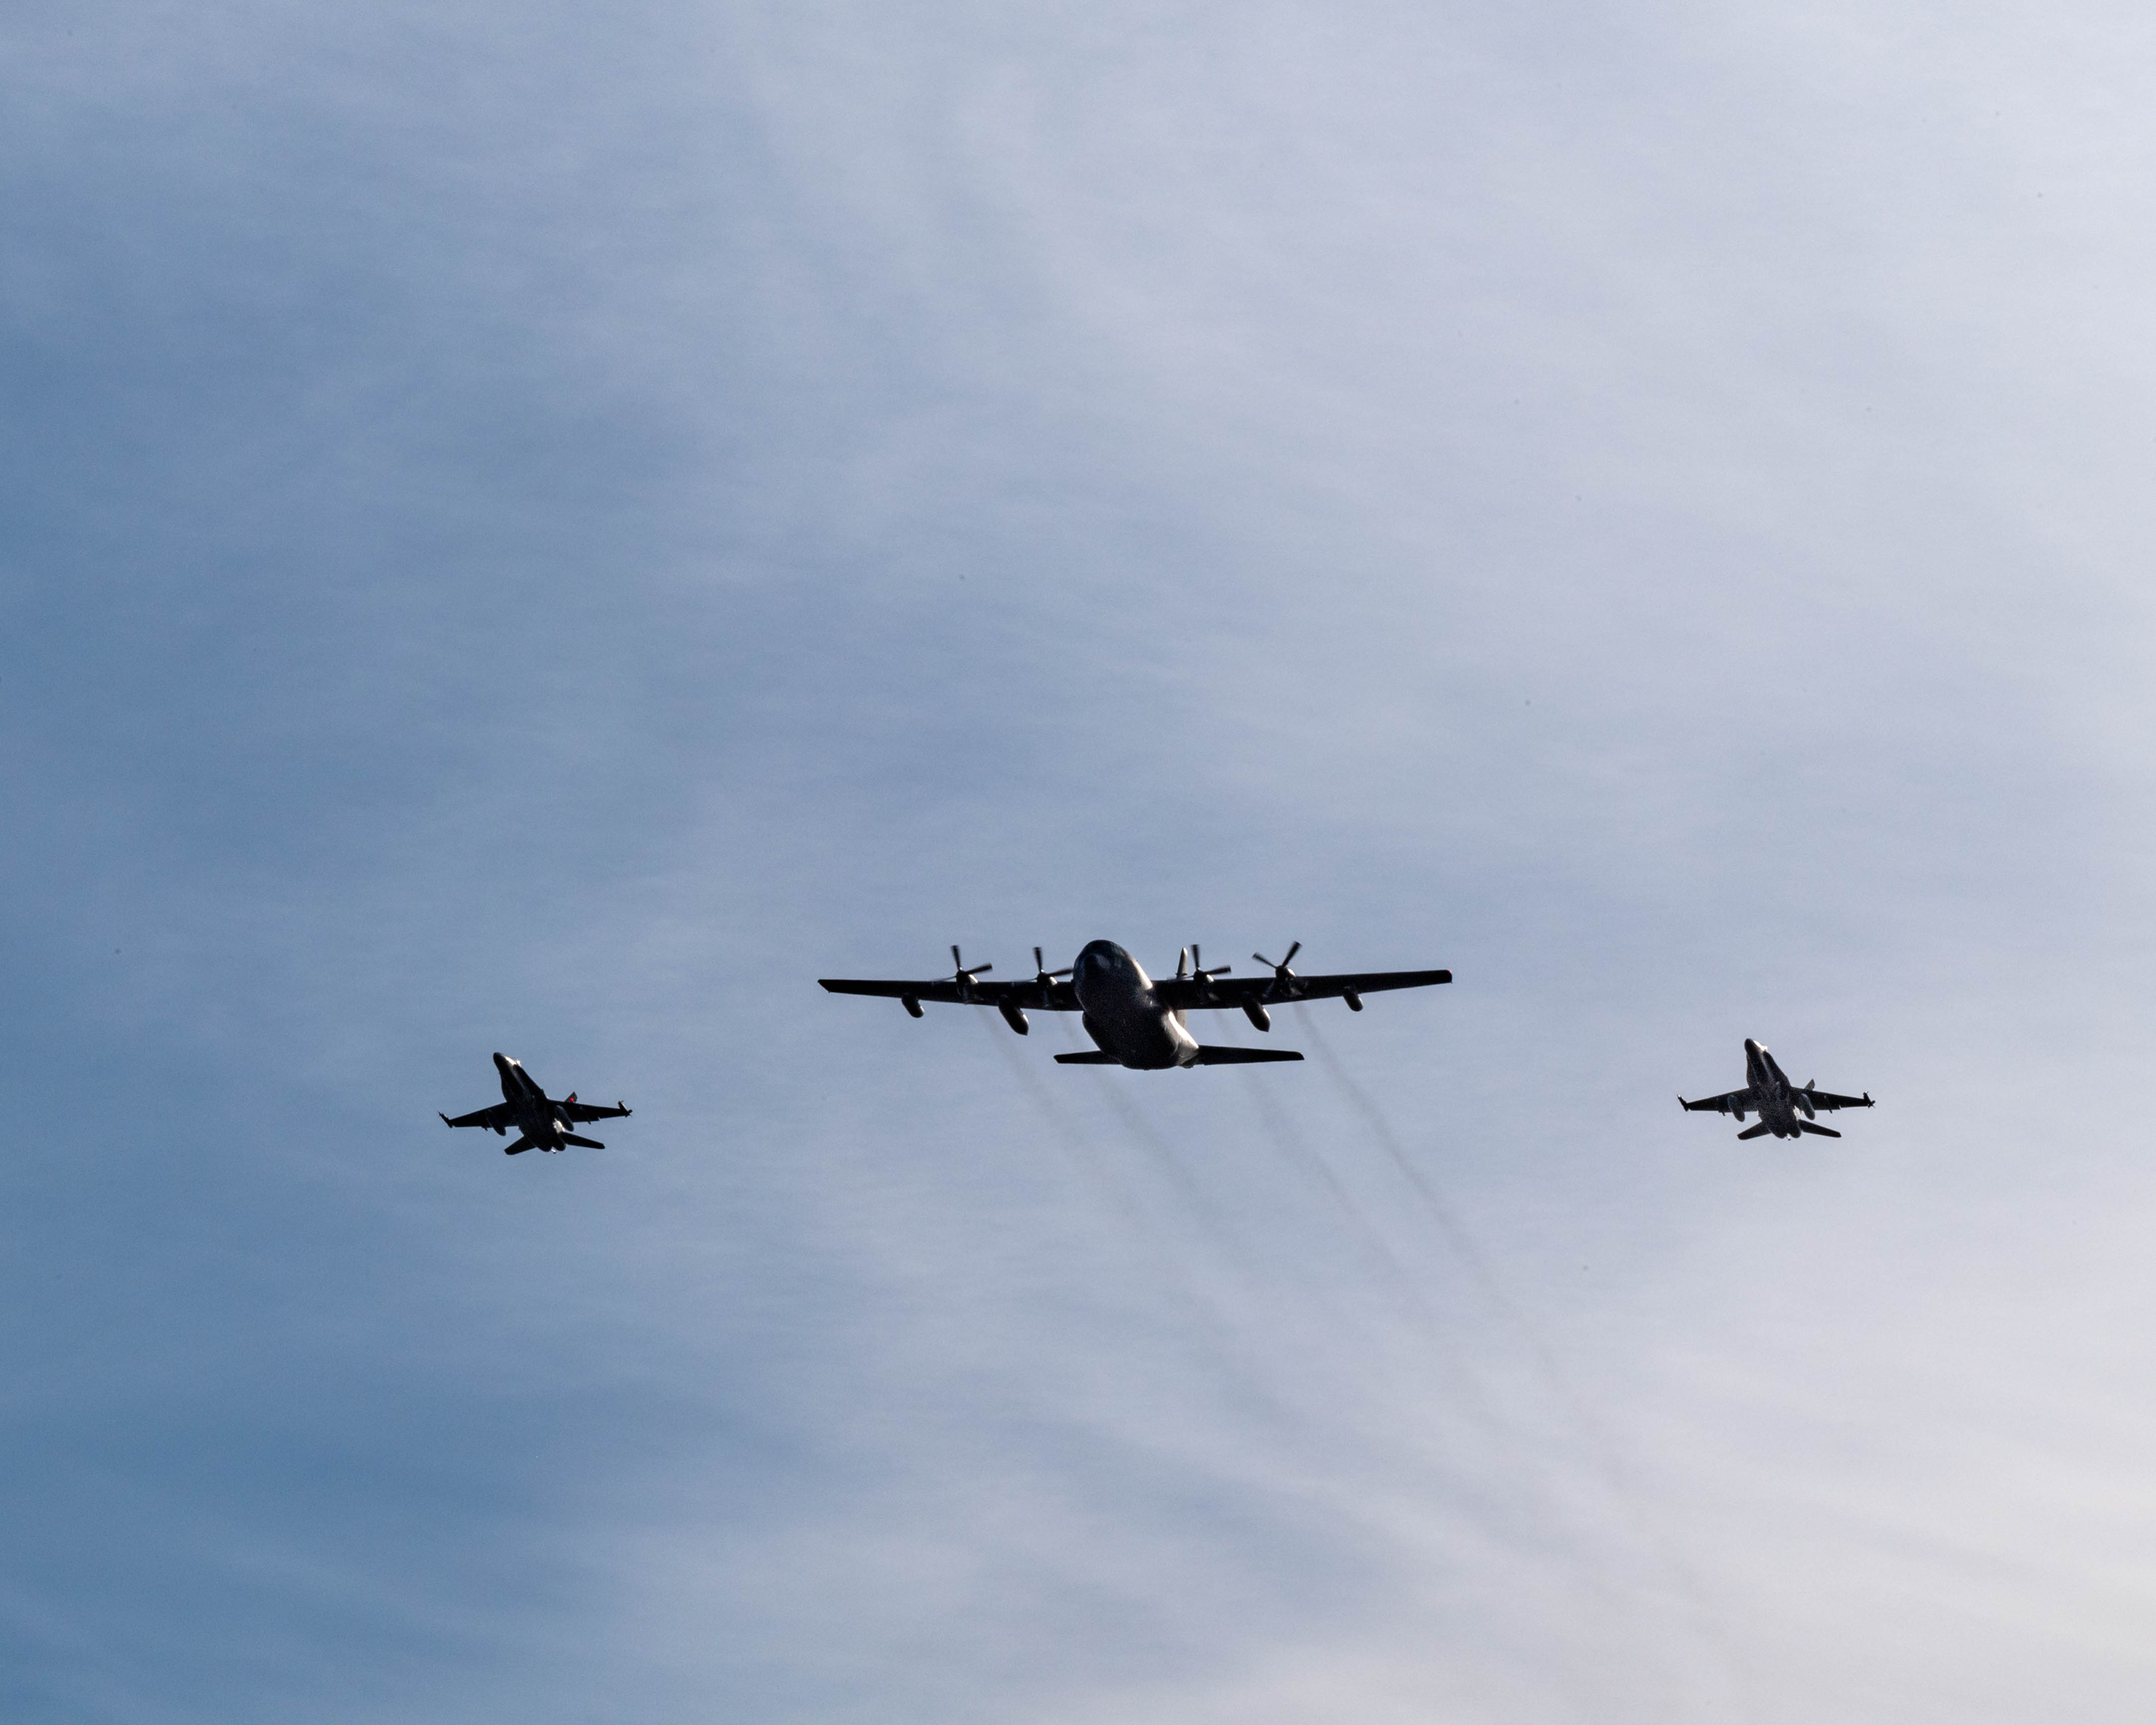 A CC-130 Hercules aircraft flies in formation with two CF-188 Hornet fighter aircraft on October 13, 2020, to mark the 60th year of service of the aircraft in the Royal Canadian Air Force. PHOTO: Corporal Darryl Hepner